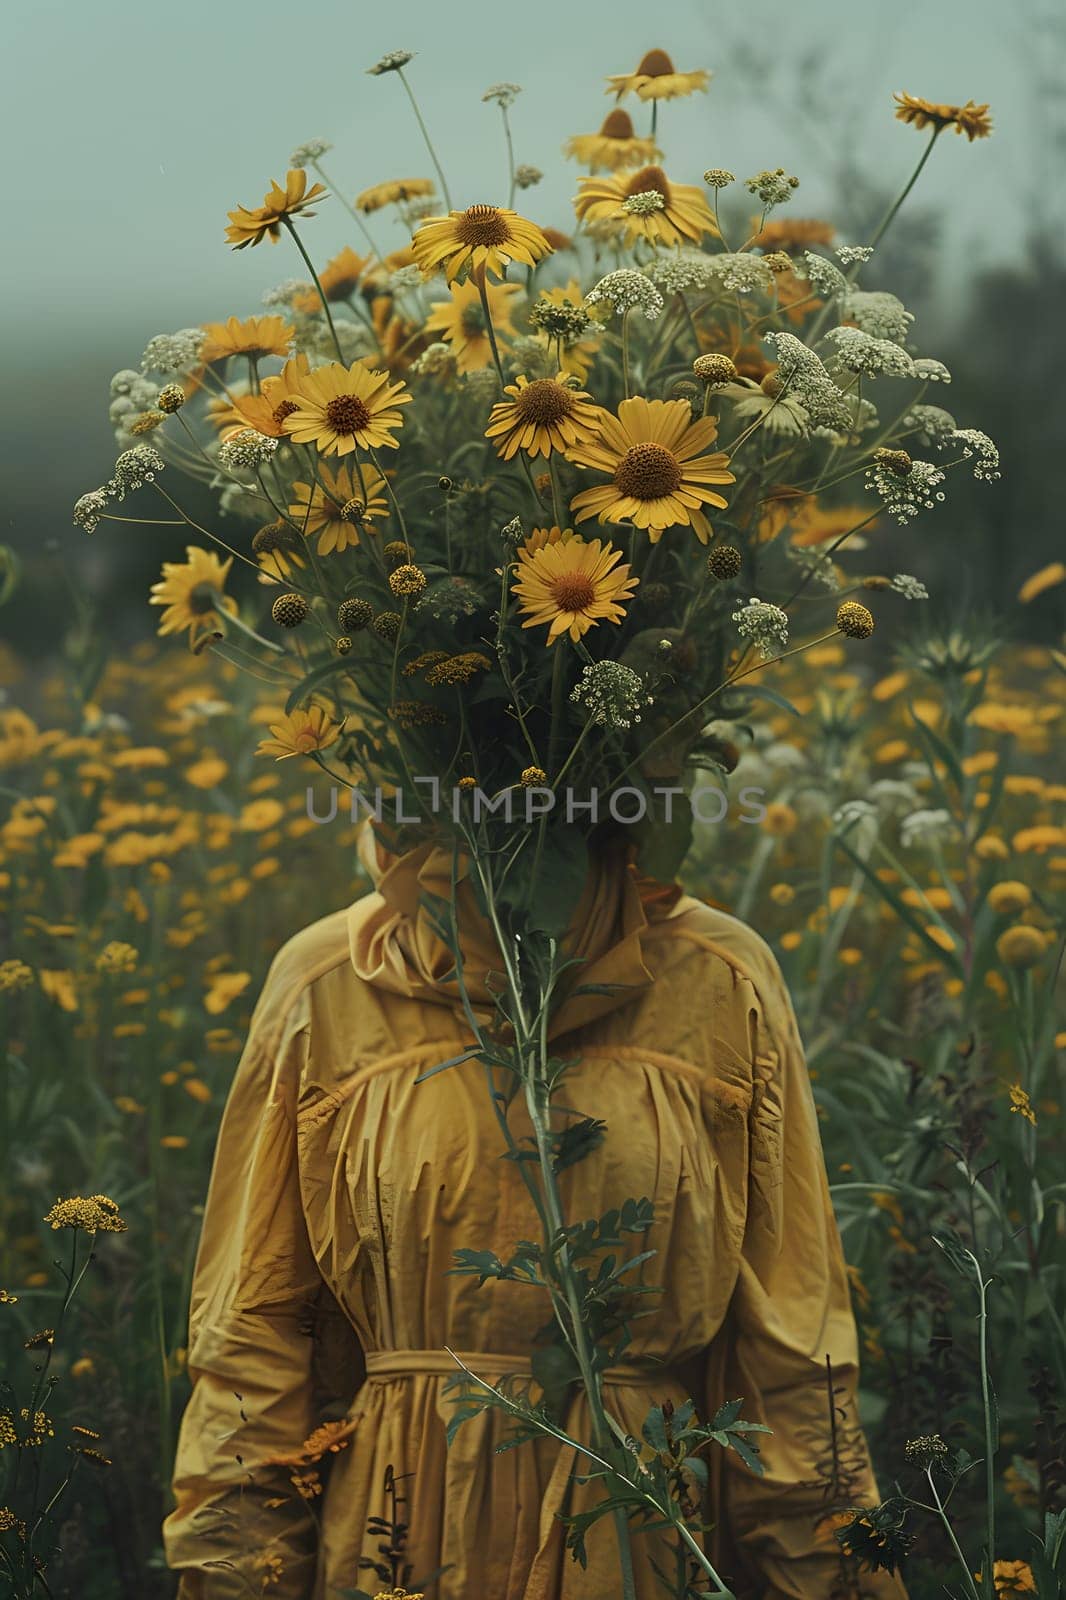 A woman in a sunny yellow dress balances a bouquet of matching yellow flowers on her head, creating a harmonious display of nature and art in a grassy landscape